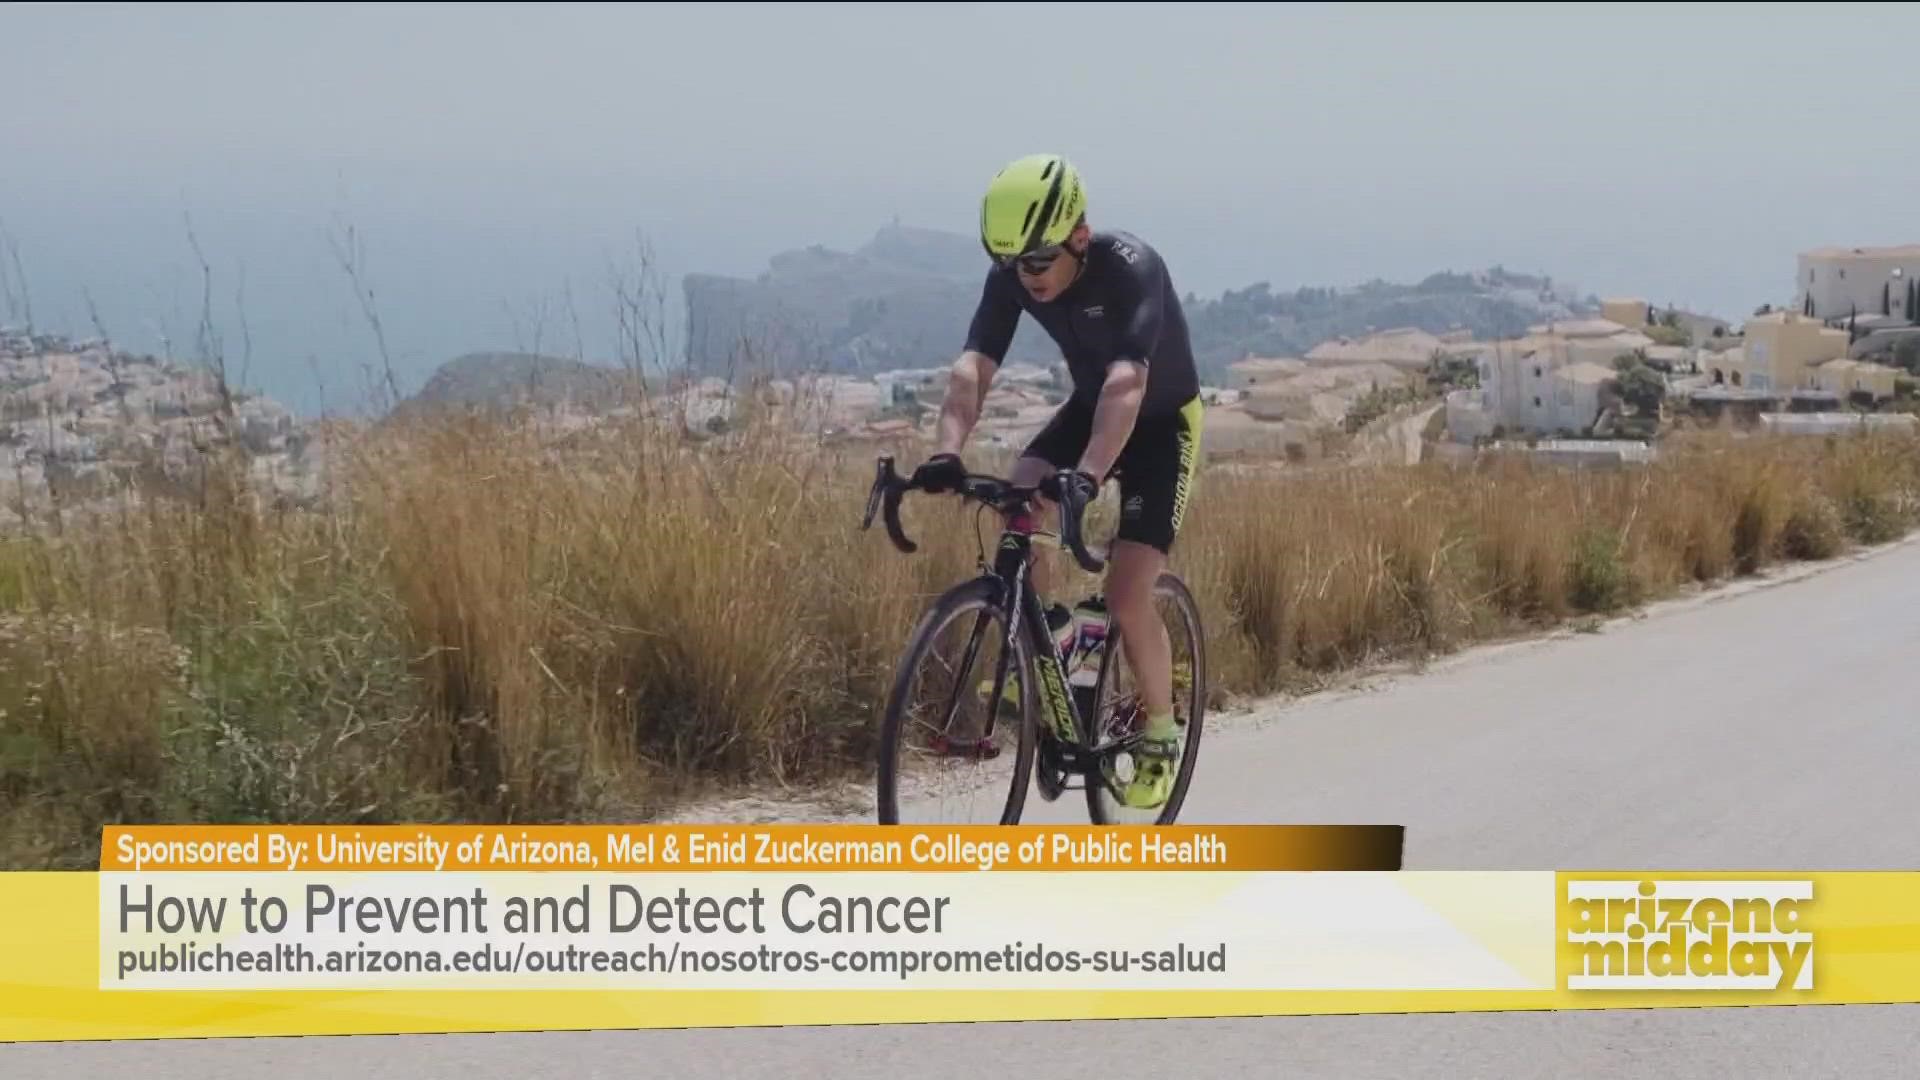 Dr. David Garcia with U of A says daily exercise and moderate alcohol use are just a few ways to prevent cancer. He also suggests getting screened regularly.